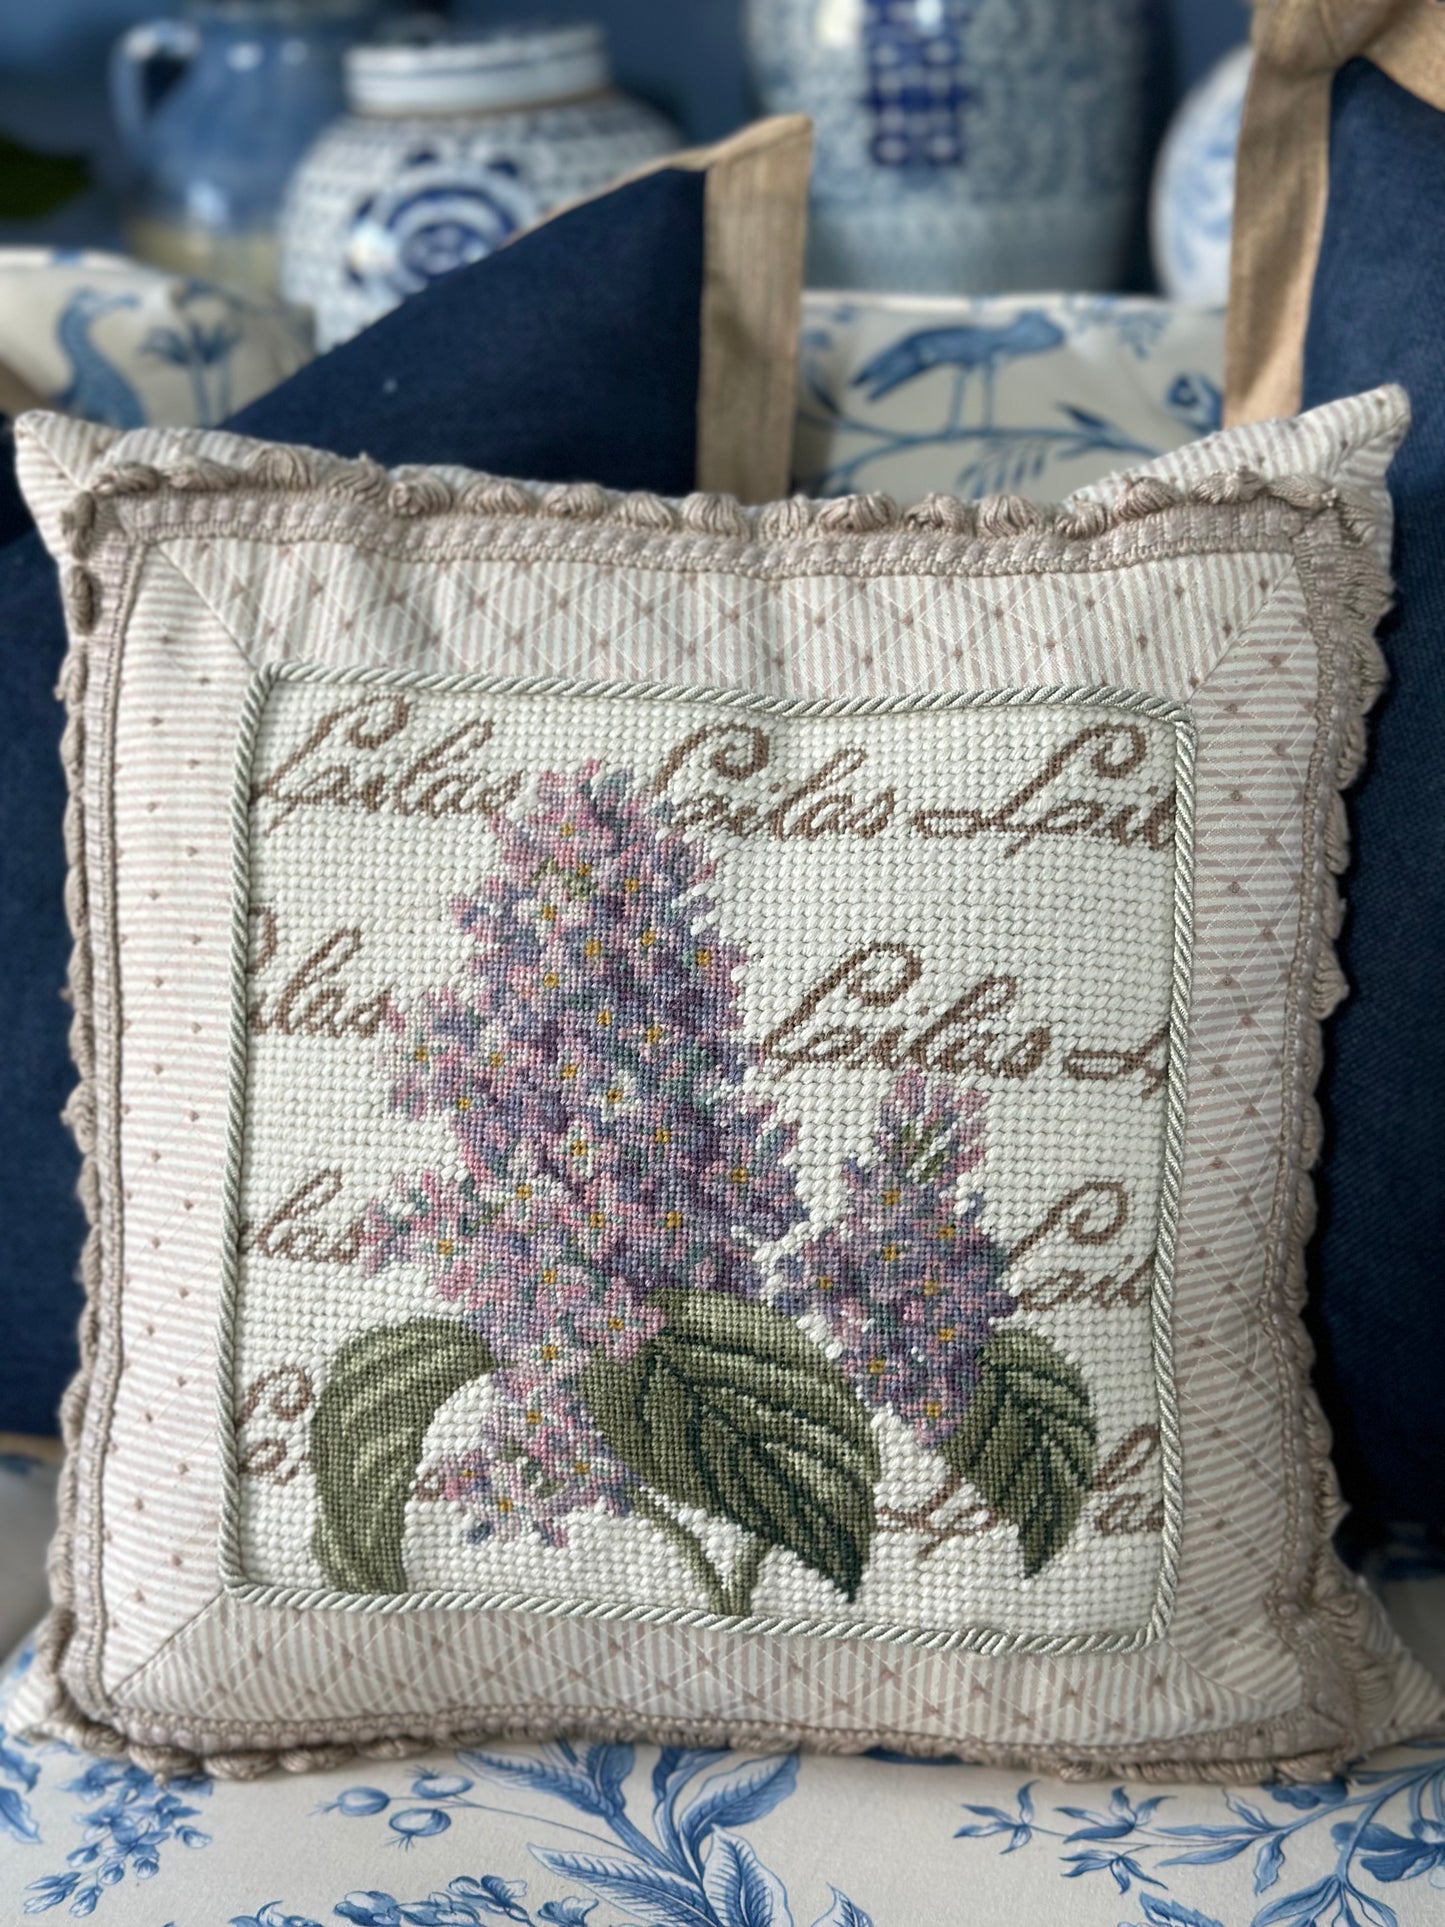 Vintage Needlepoint Pillow, Lilac- 14x14". Excellent Condition!